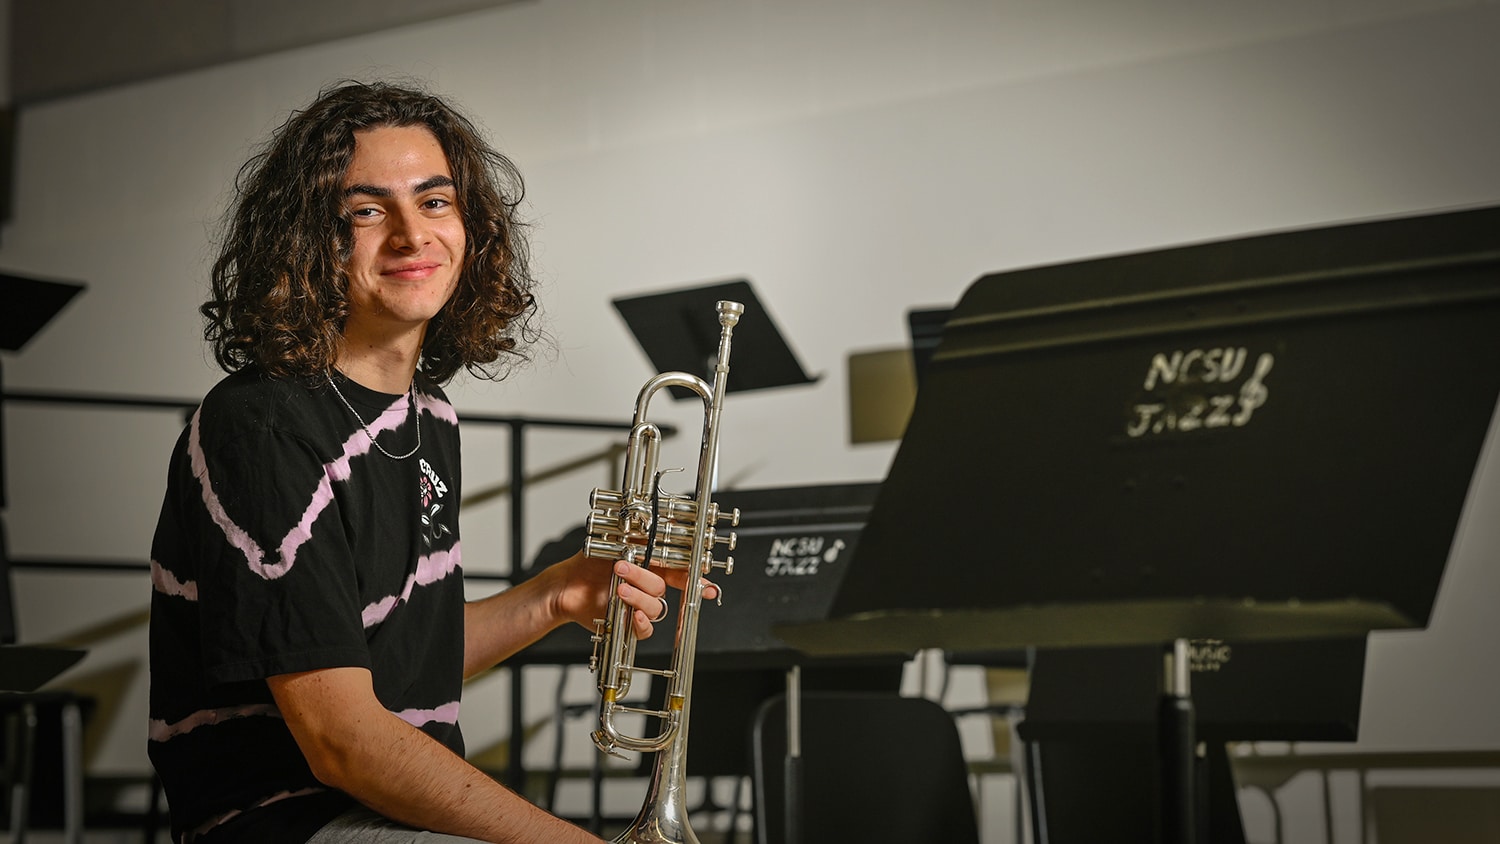 Aidan Dumain holds a trumpet in a rehearsal room, surrounded by music stands that say "NCSU Jazz".